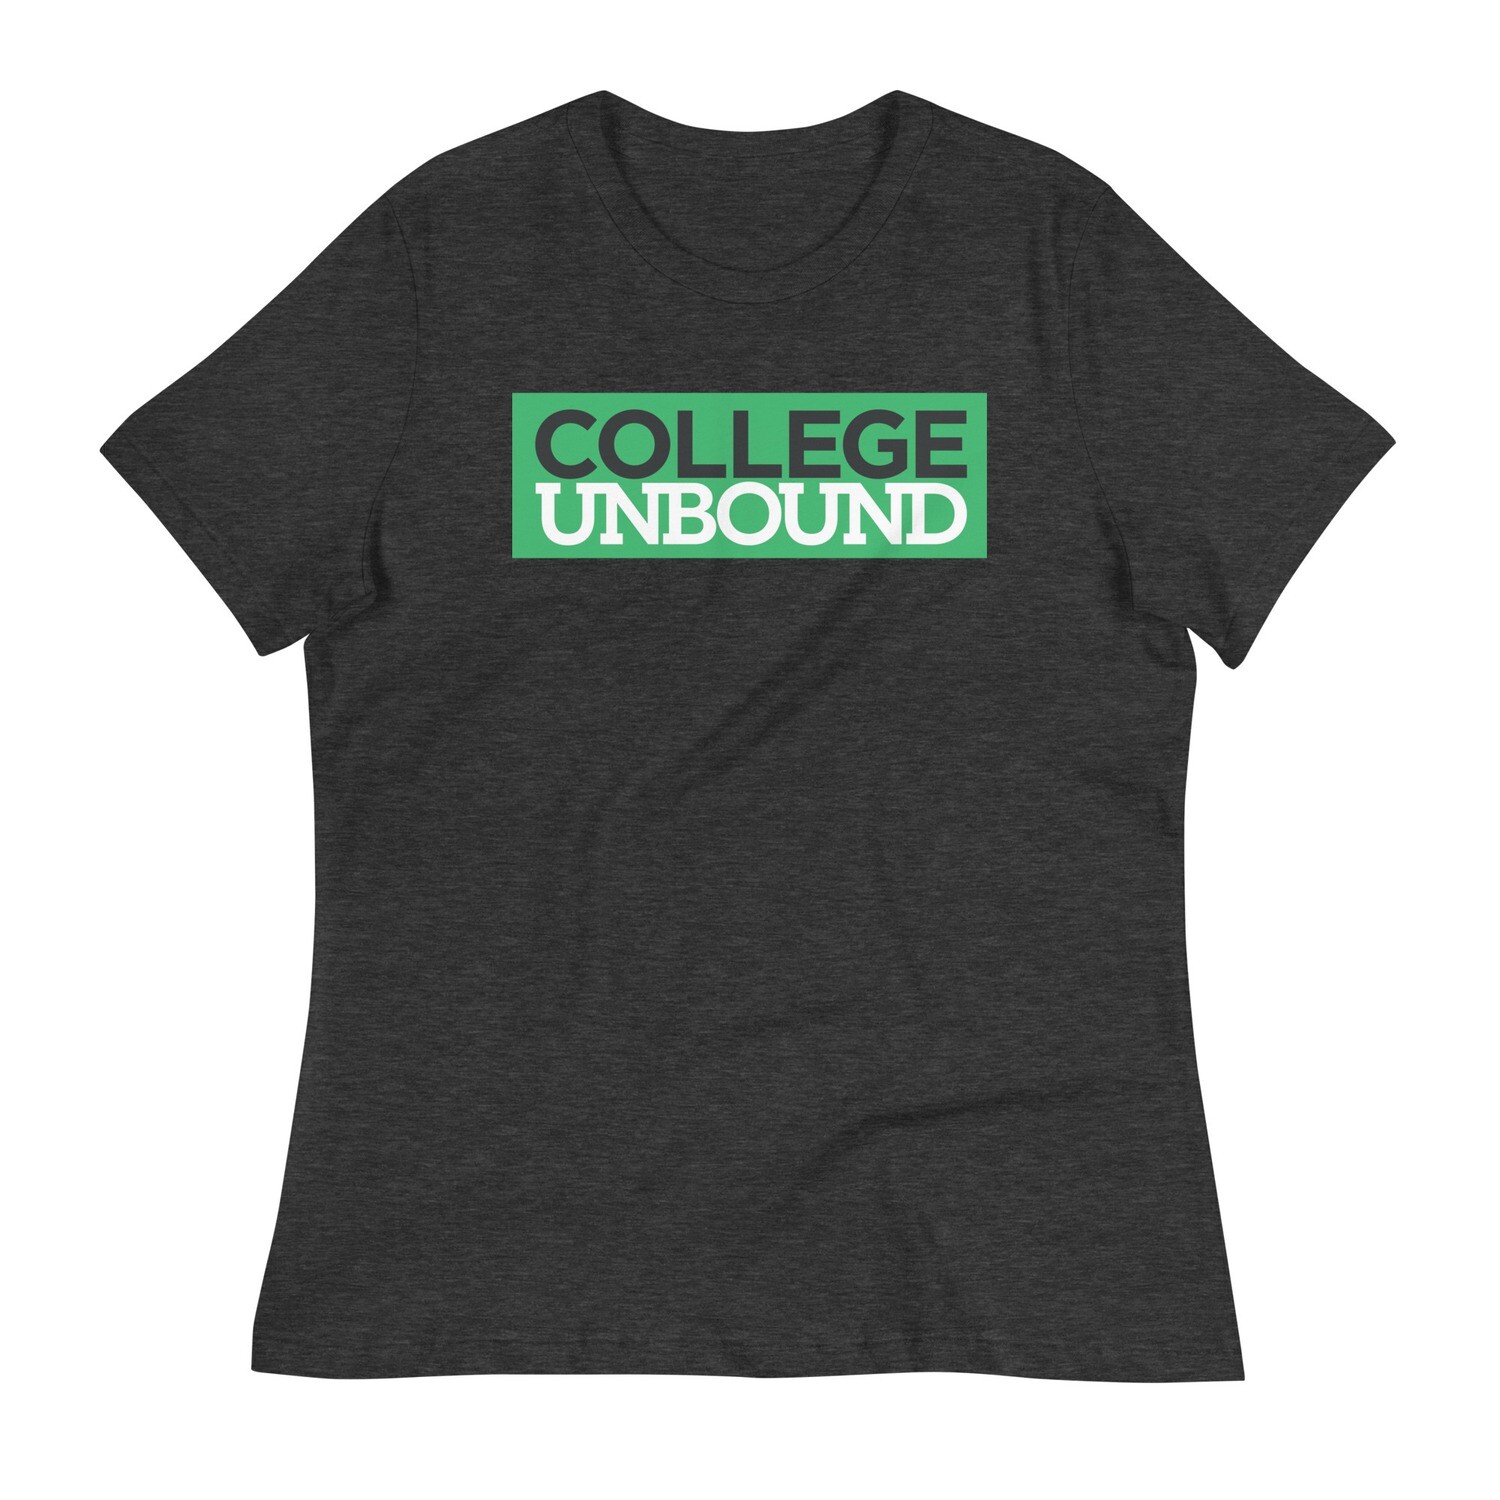 College Unbound Women's Relaxed Tee